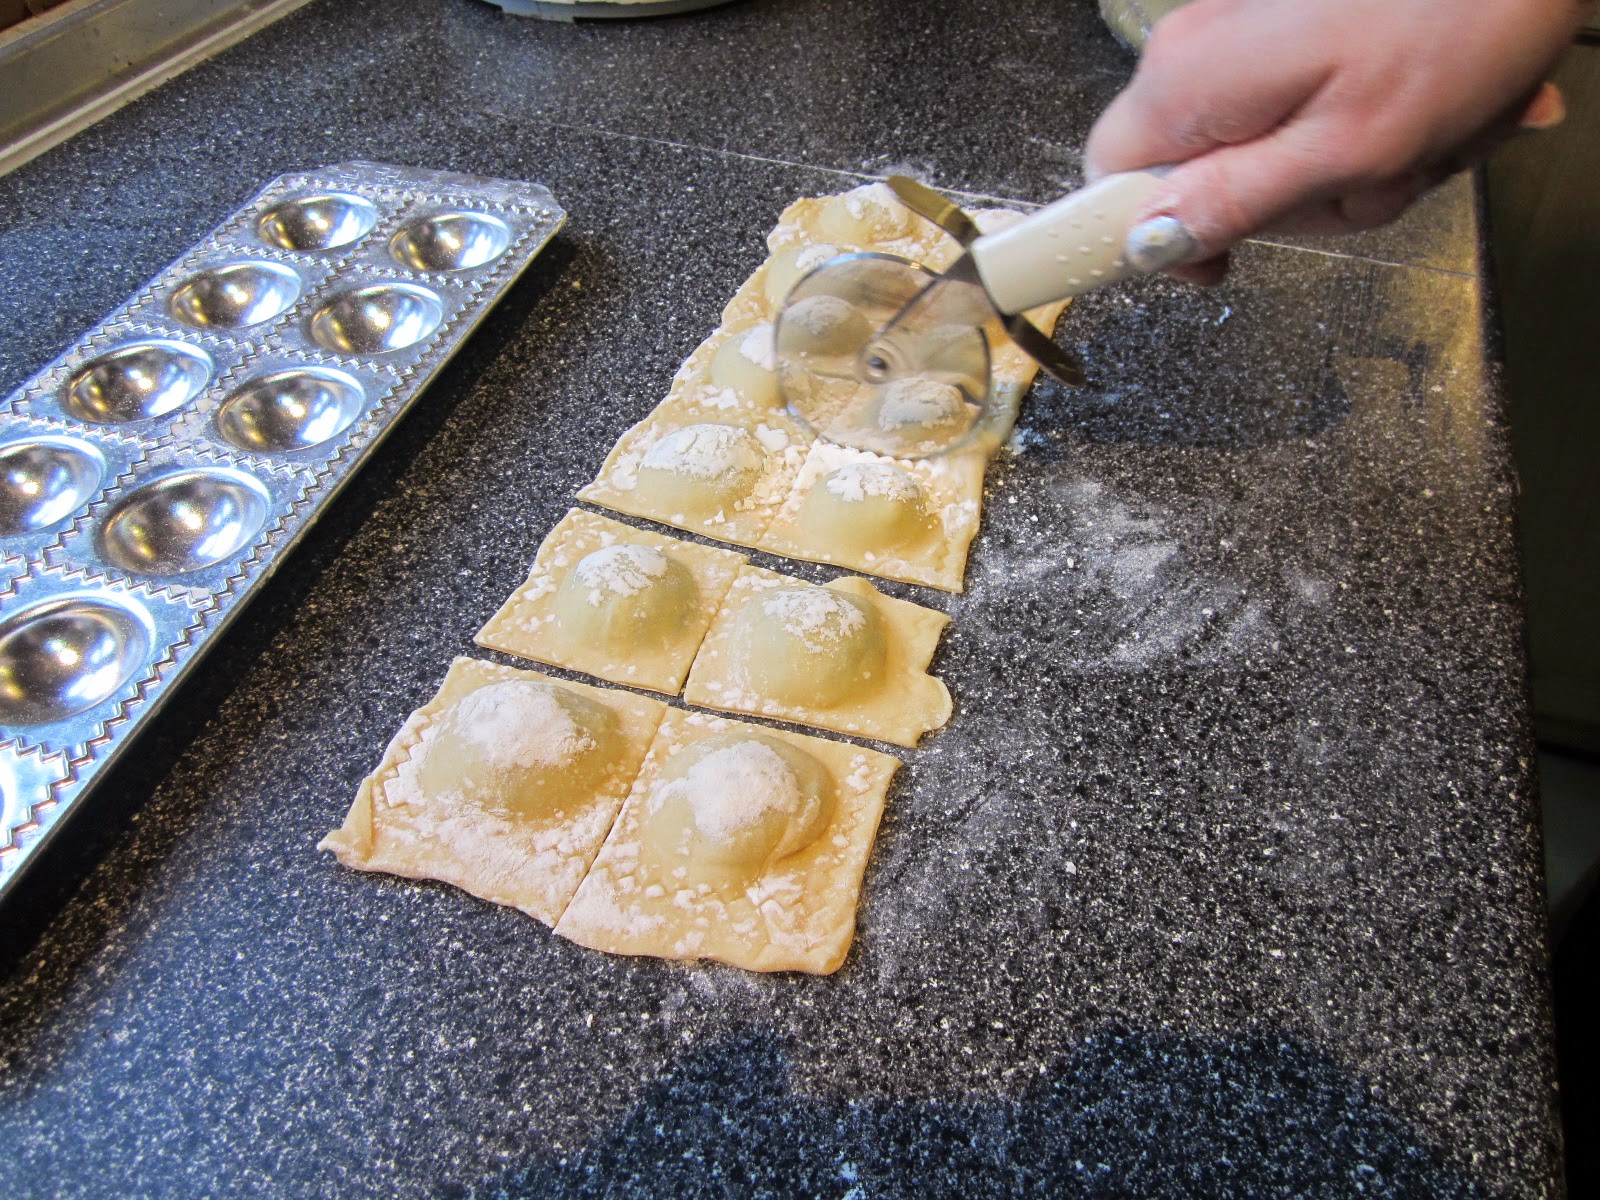 Food Lust People Love: Homemade spinach and cheese ravioli do take a little time but making your own pasta dough is right up there on the satisfaction scale with baking bread. You know what’s in it. It’s fresh and the taste is far superior to store-bought. Best of all, it’s surprisingly easy.